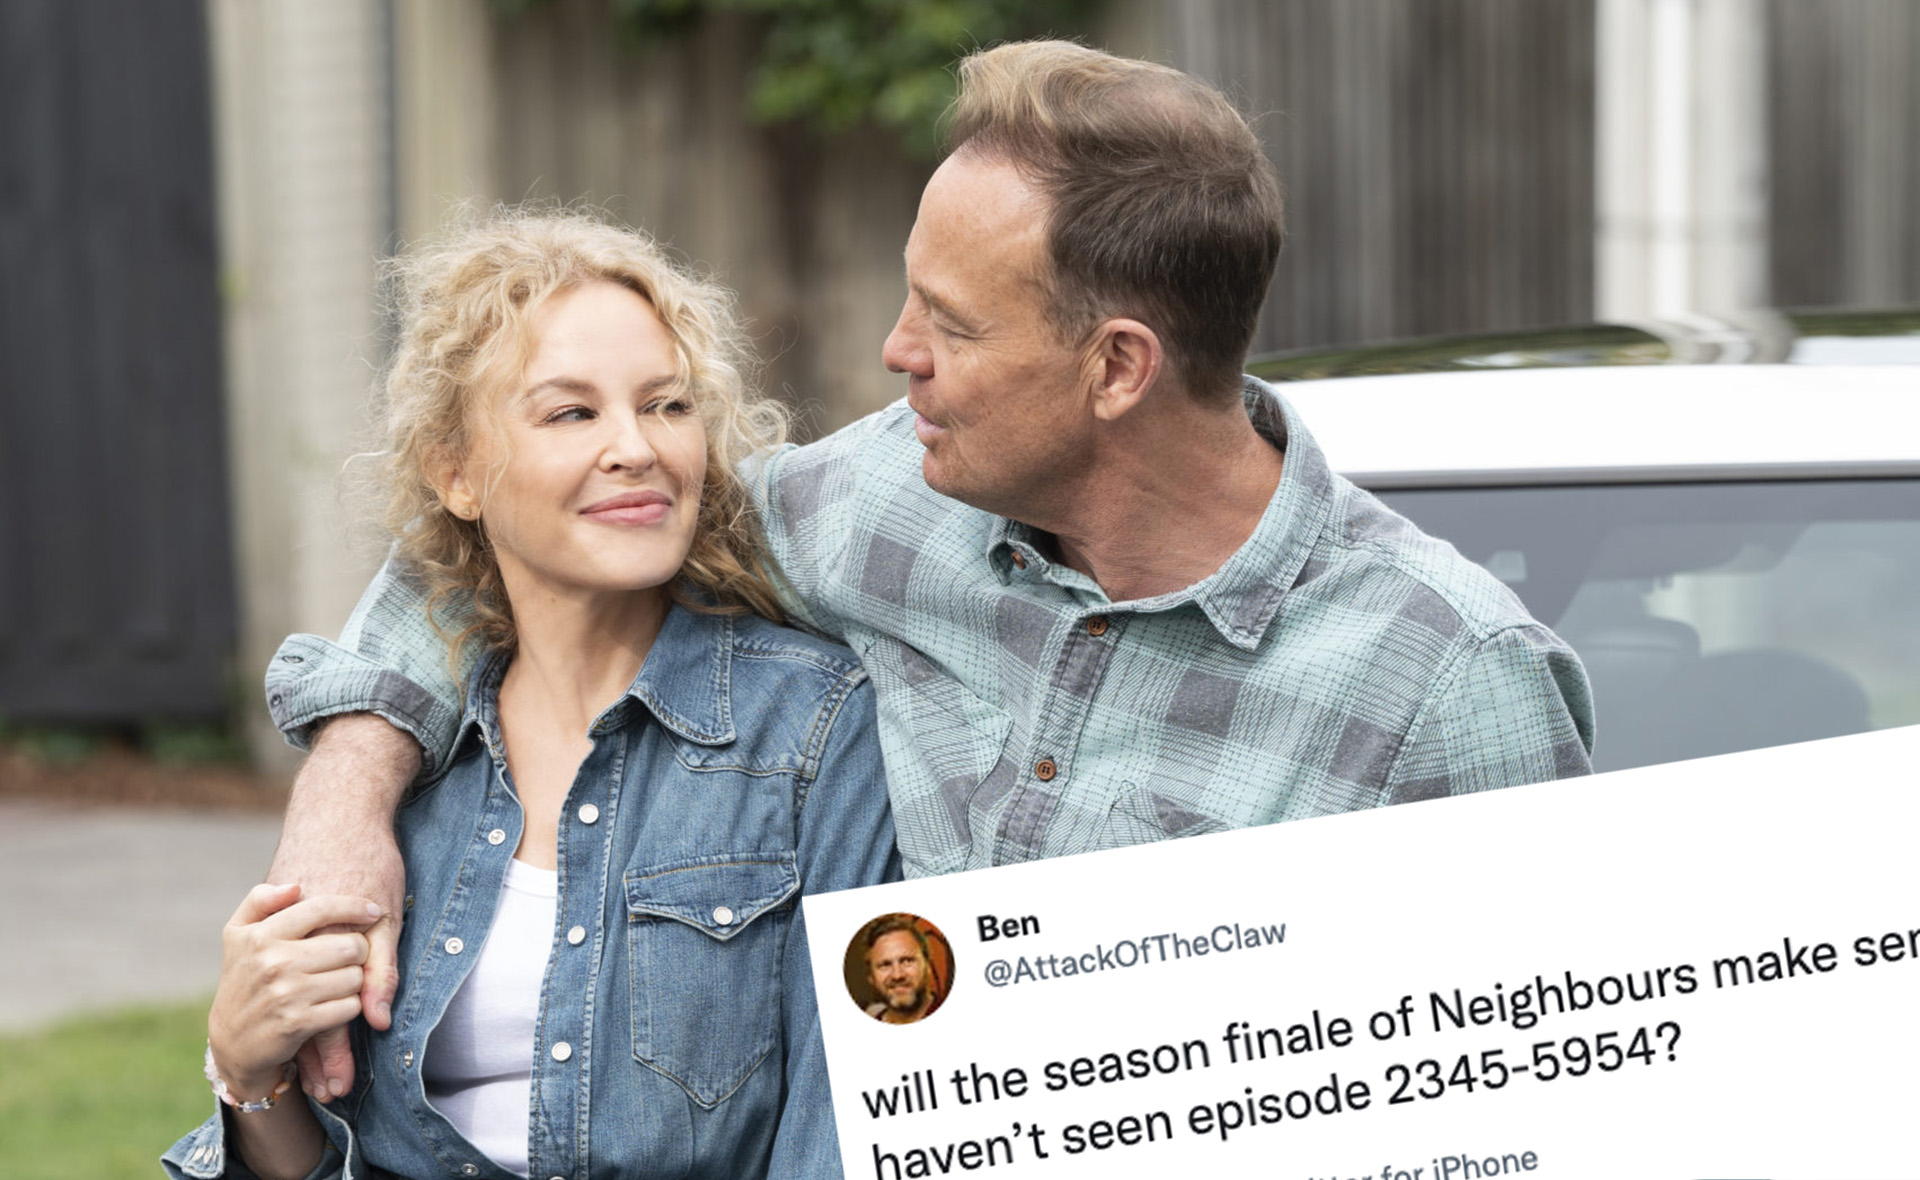 Australia reacts to the era-defining Neighbours finale: “MAFS remains on the air but Neighbours gets the flick”